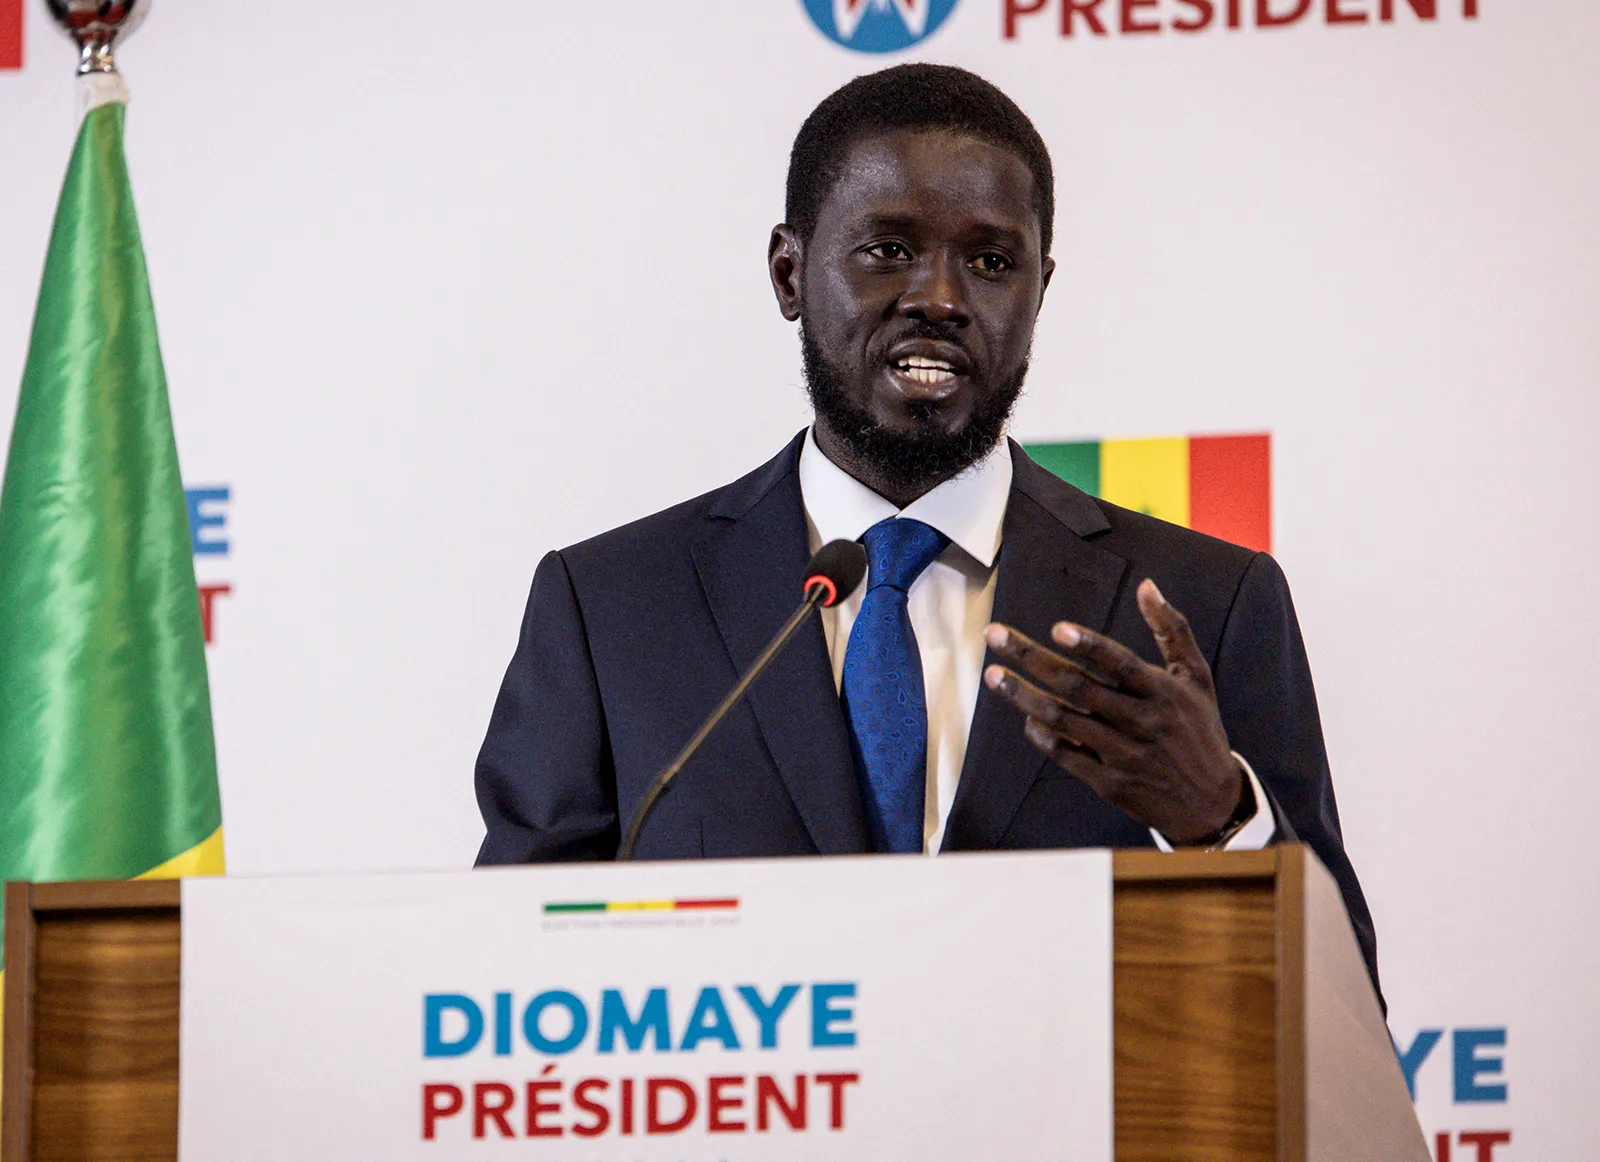 Election results confirm Bassirou Diomaye Faye’s victory in Senegal’s presidential race